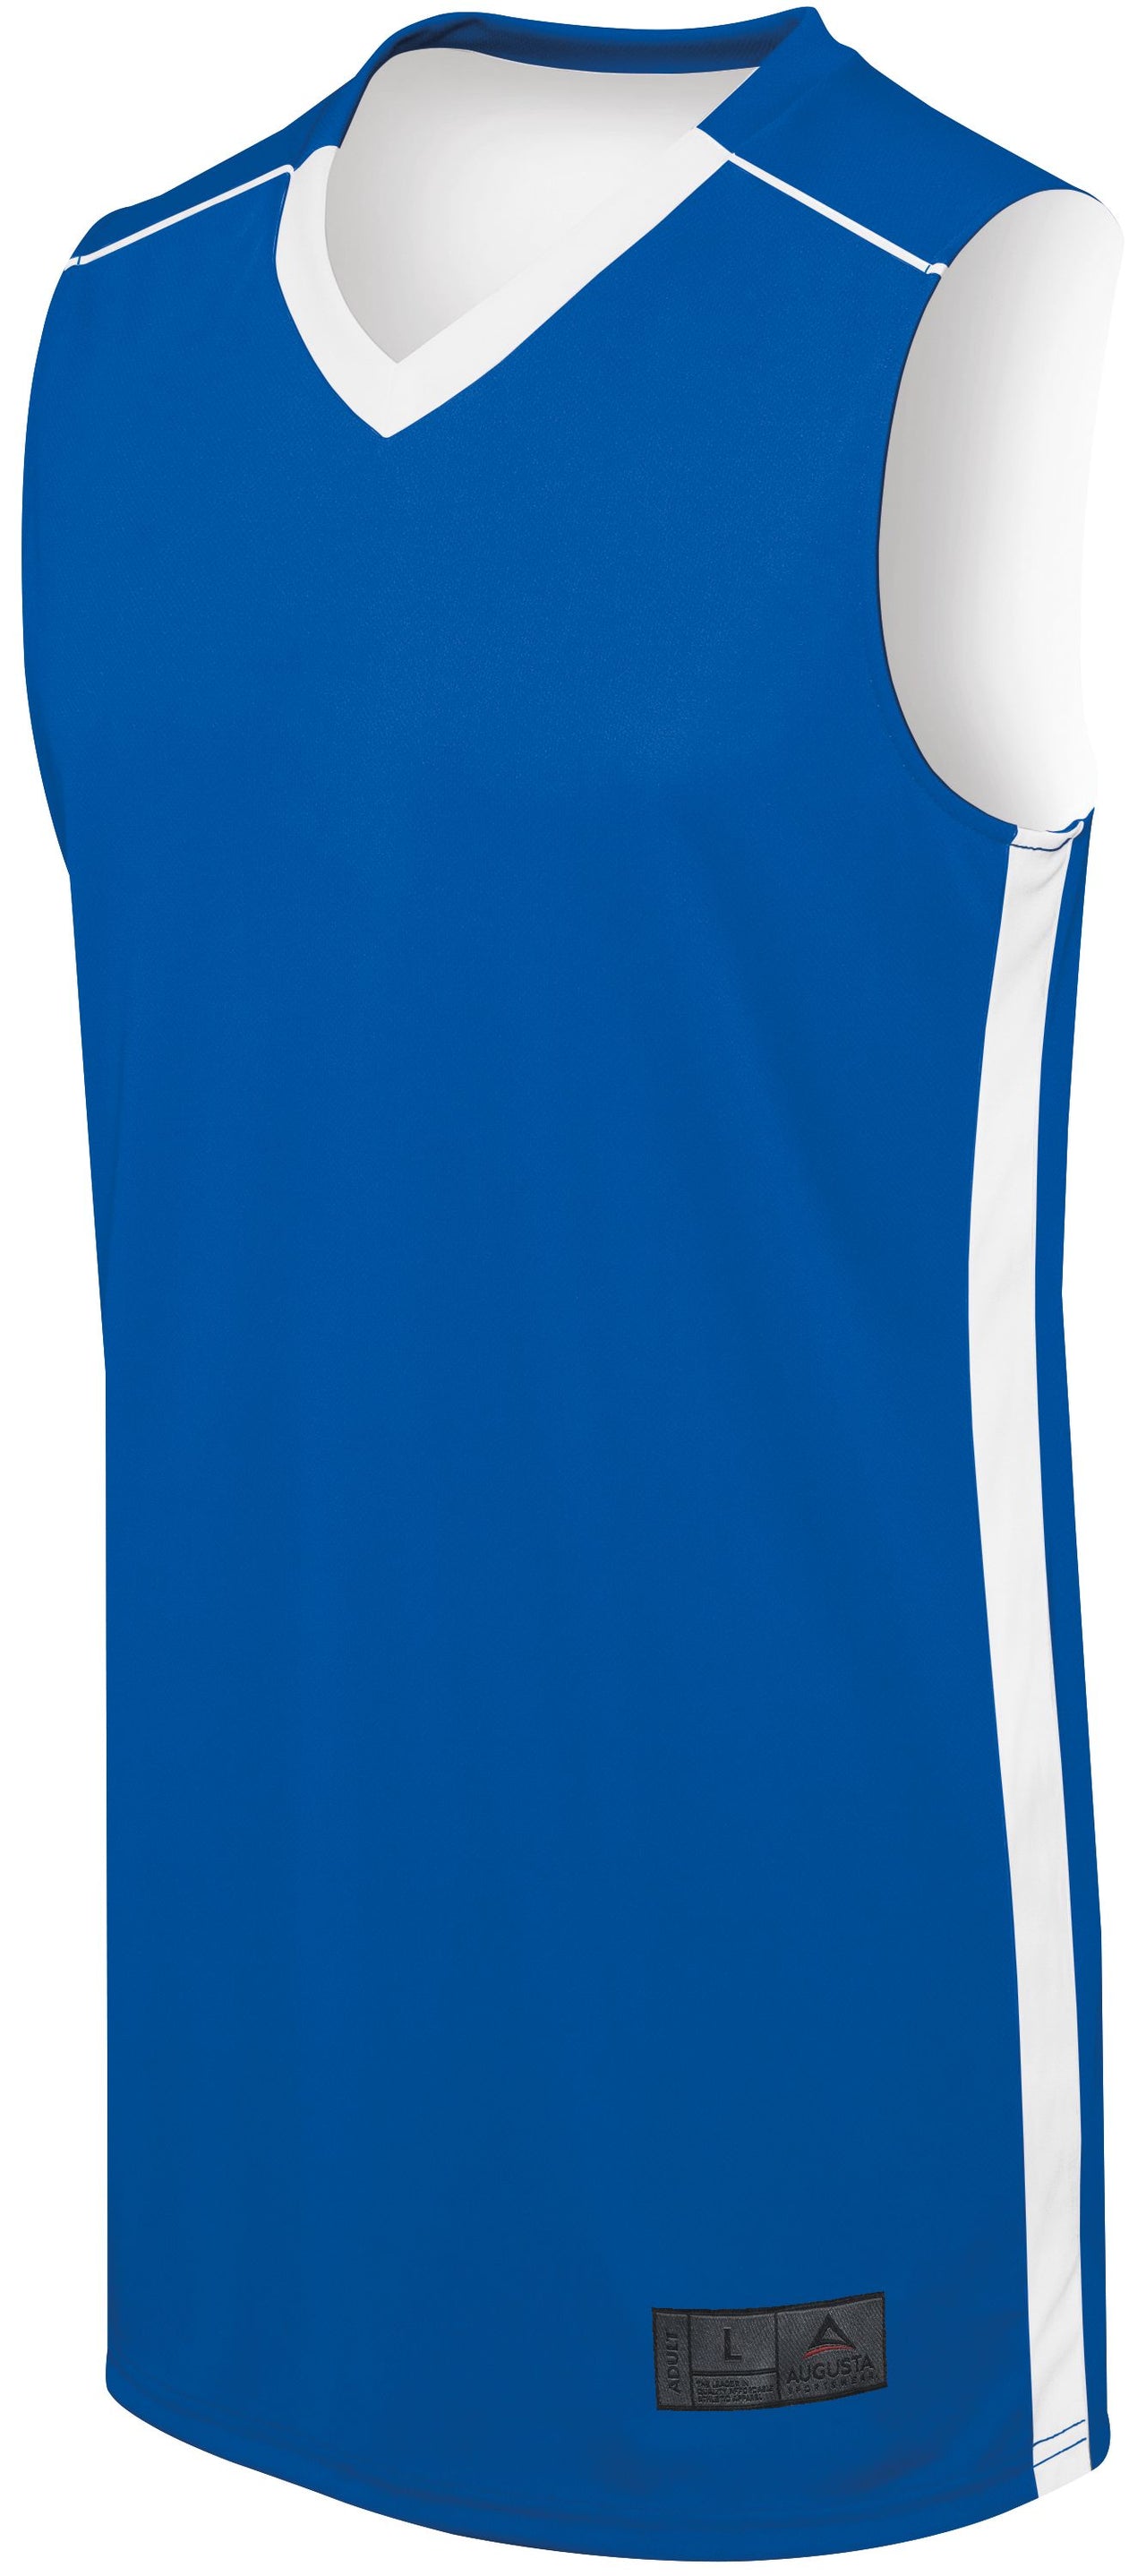 Ladies Competition Reversible Jersey - 332402